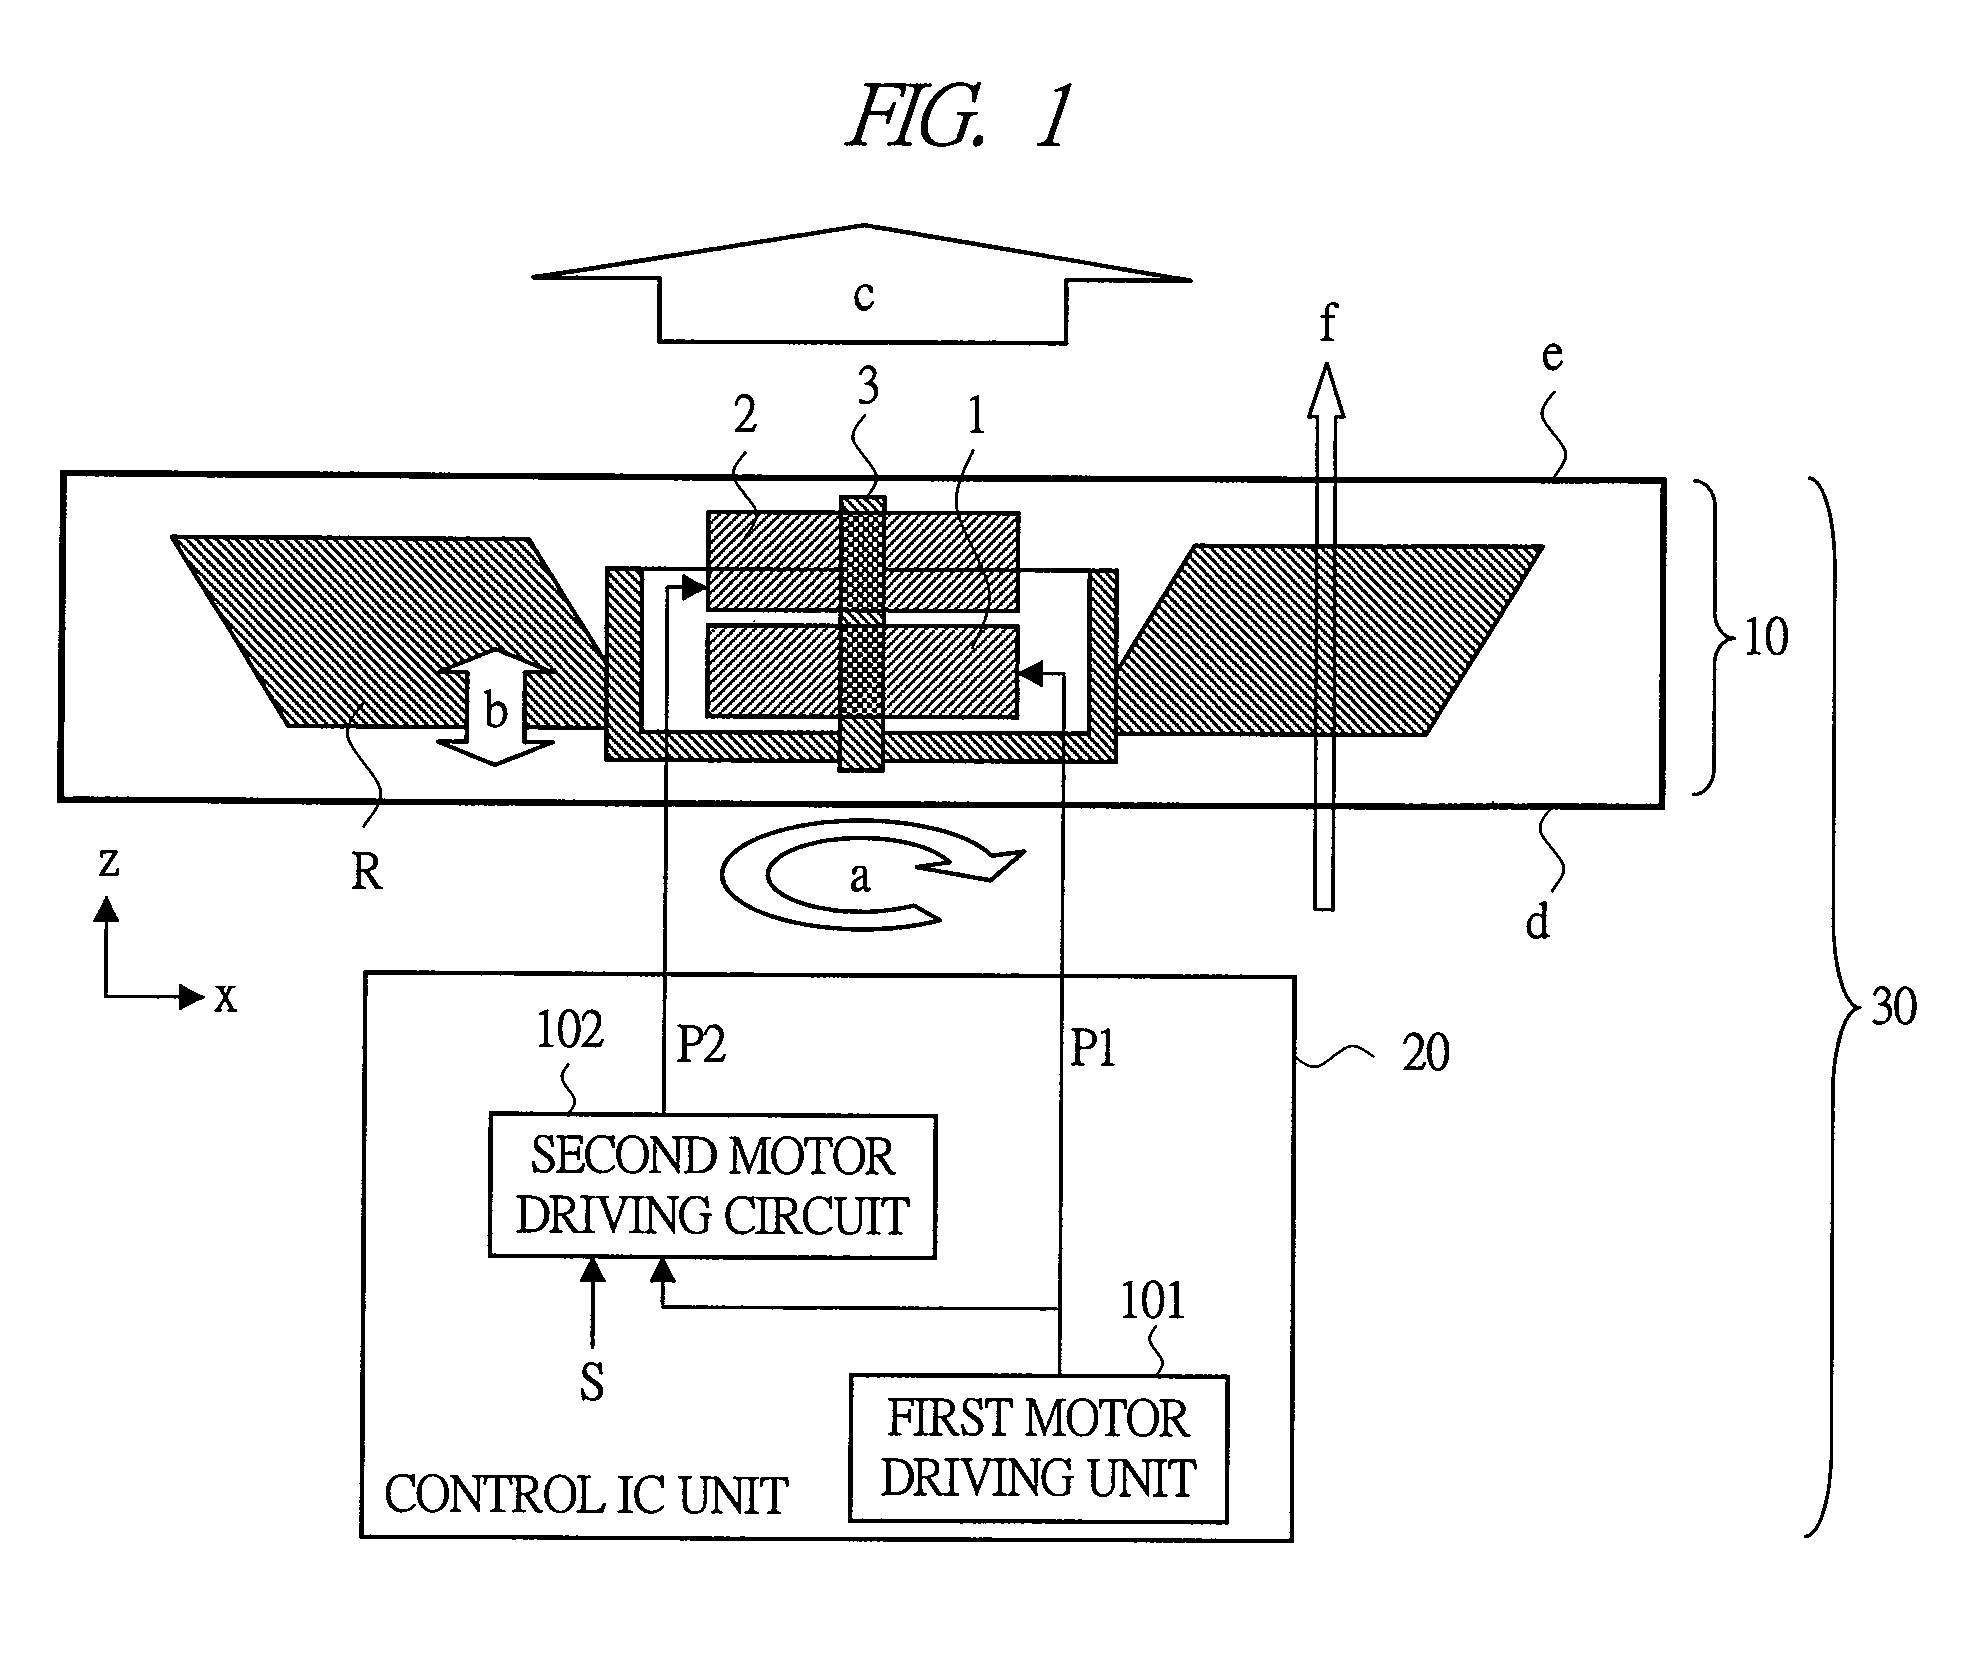 Electronic device having a blower with noise control